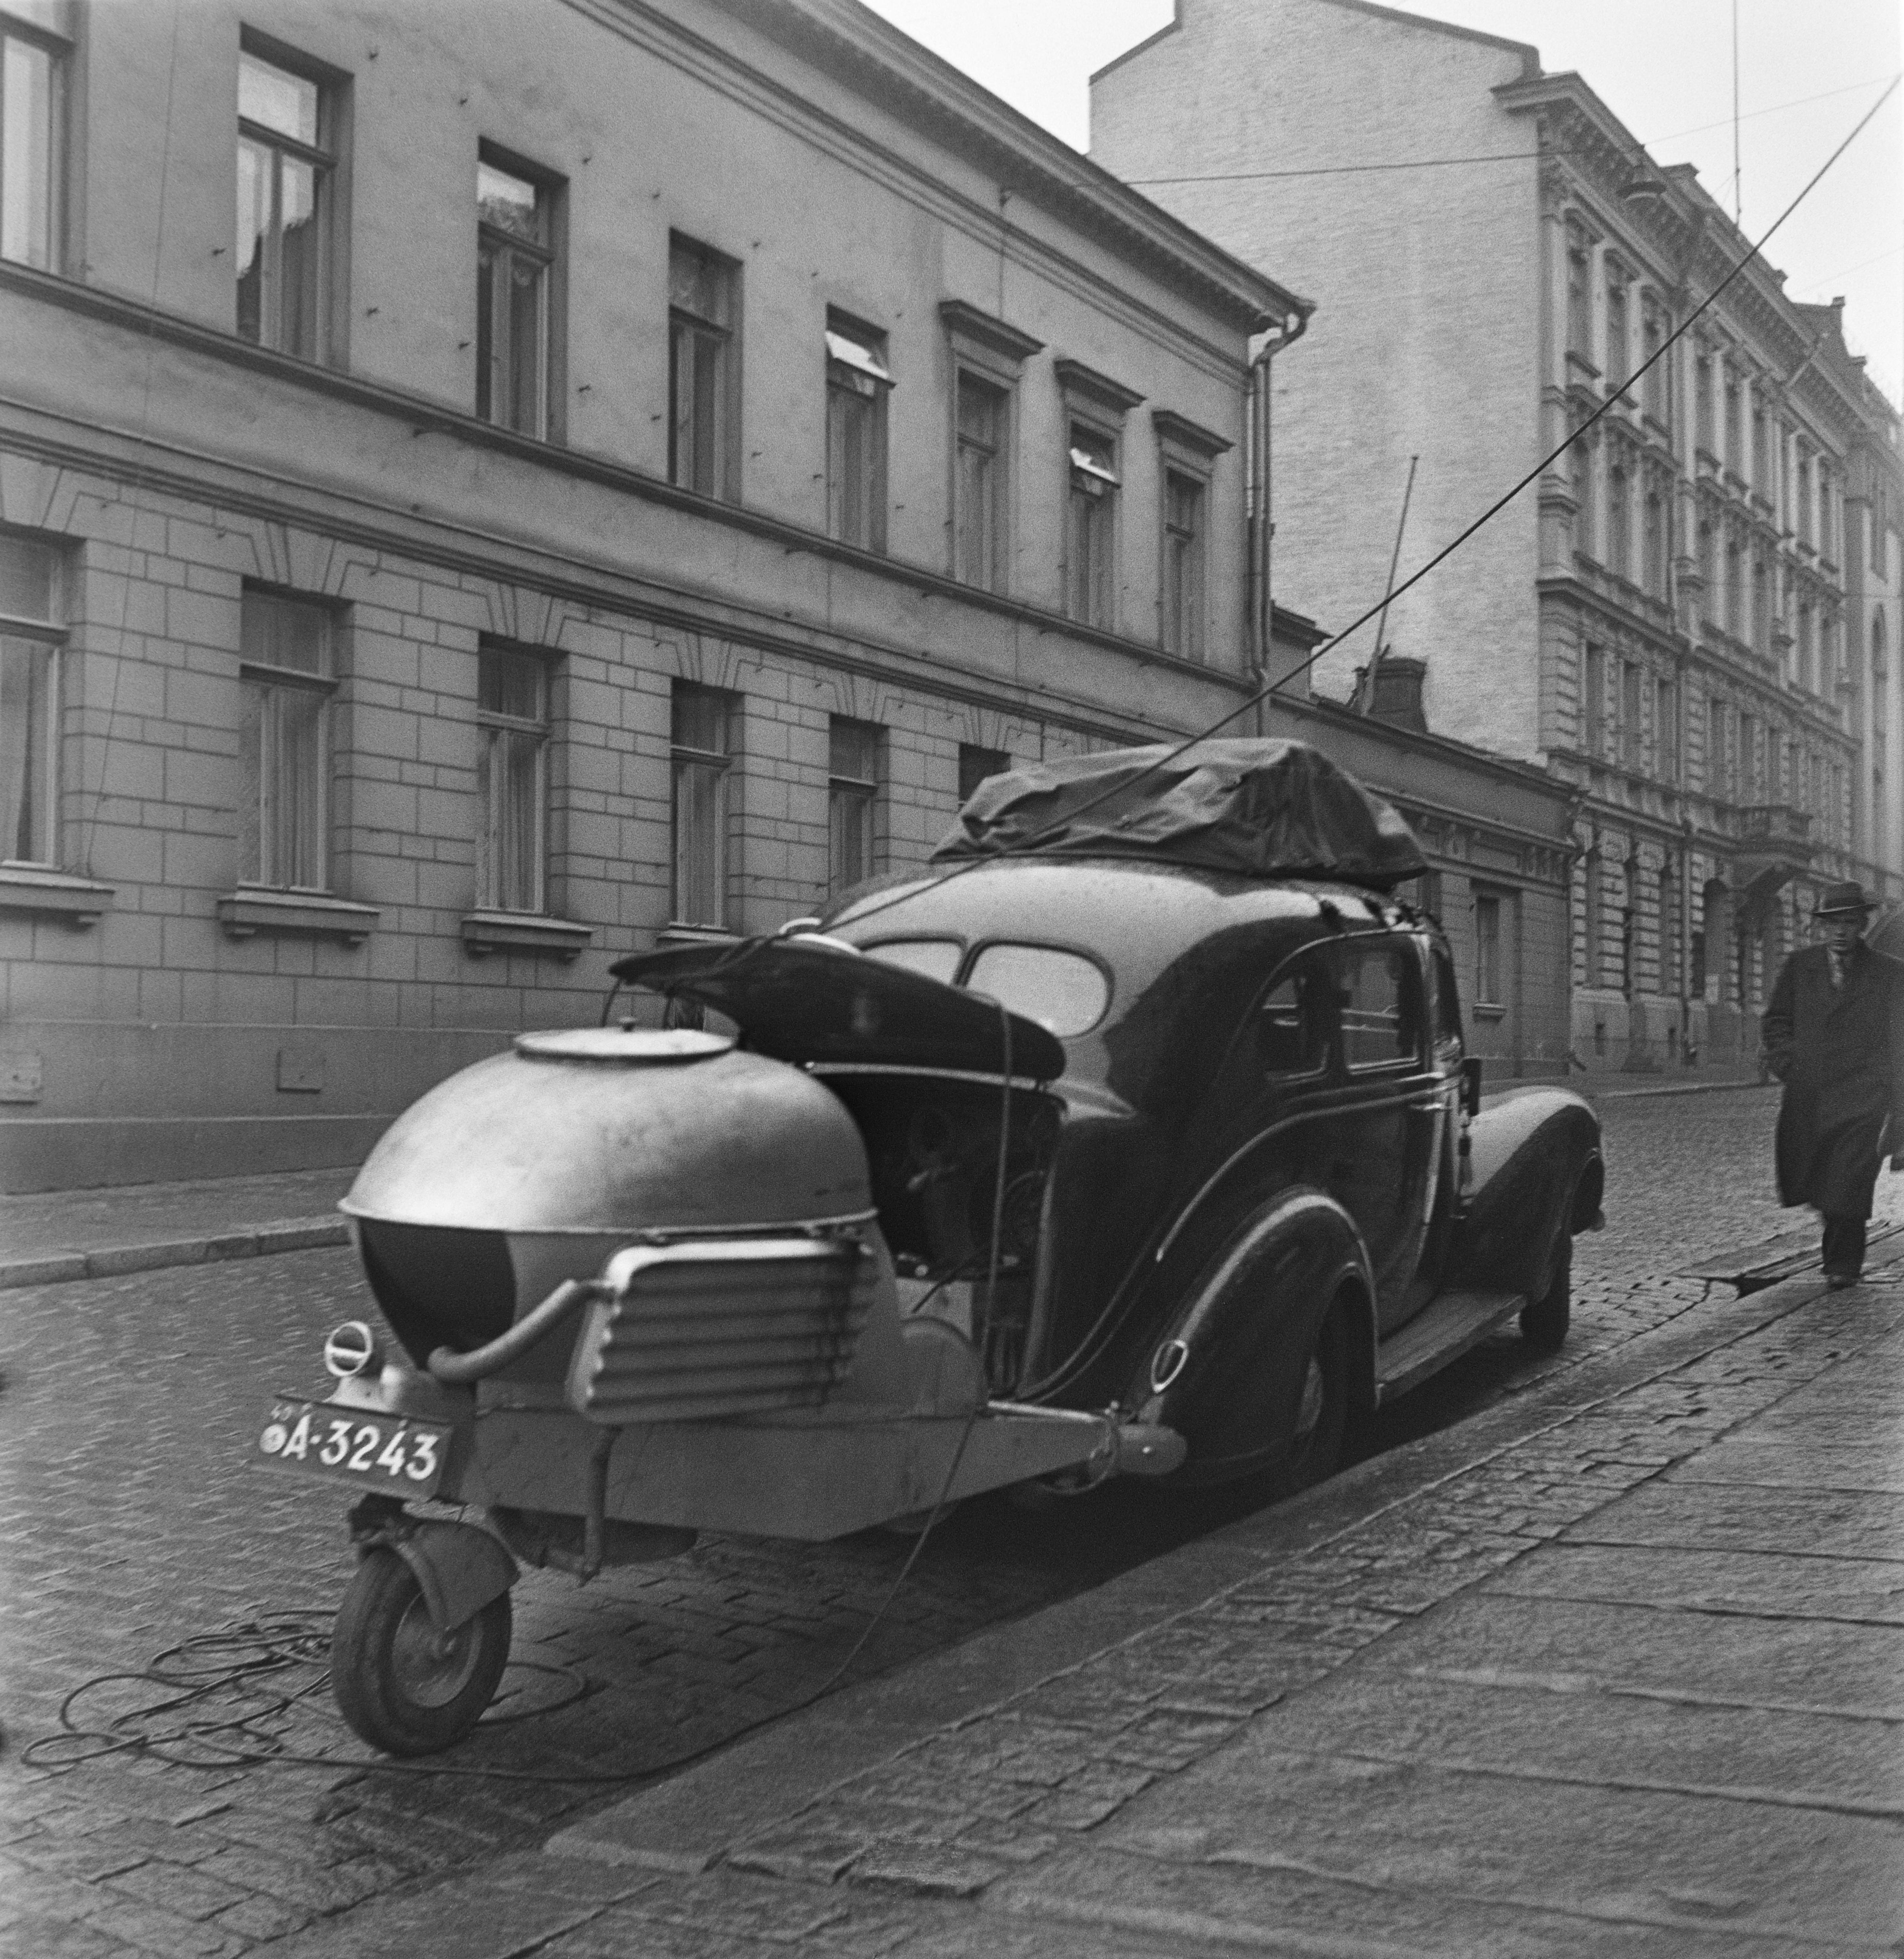 Broadcast van with a wood gas unit, 1940s - General Radio sound car parking on the street. The time of the screening is estimated at the accuracy of the decade.
Do you know something about this picture? Leave a comment or contact us by e-mail: flickr@yle.fi Check out the archive contents of Yle: www.yle.fi/elavaarkisto Fler skatter från Yles archive: svenska.yle.fi/arkivet More about Yle, the Finnish Broadcasting Company: yle.fi/yleisradio/about-yle/ this is-is-yle